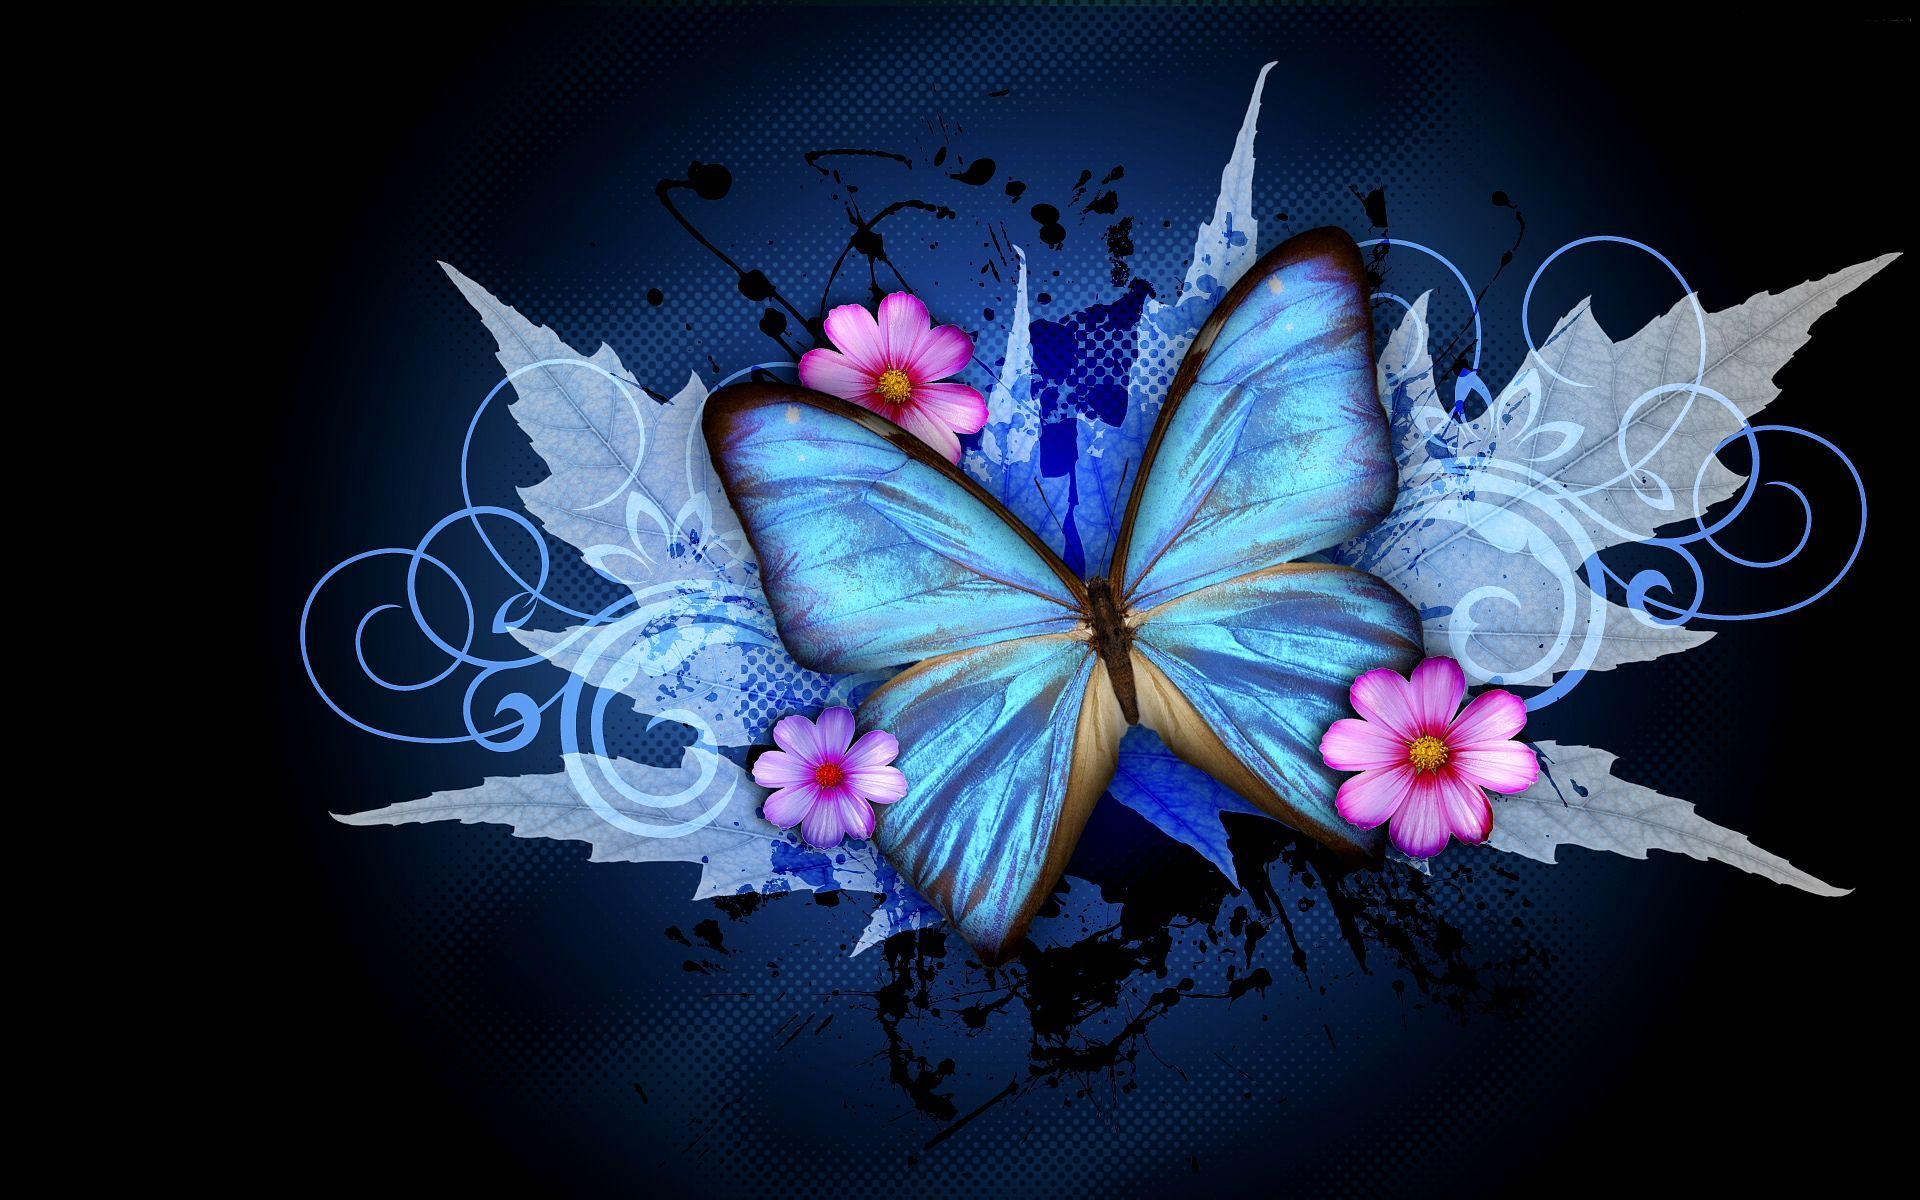 Black Butterfly Wallpaper Images  Free Photos PNG Stickers Wallpapers   Backgrounds  rawpixel